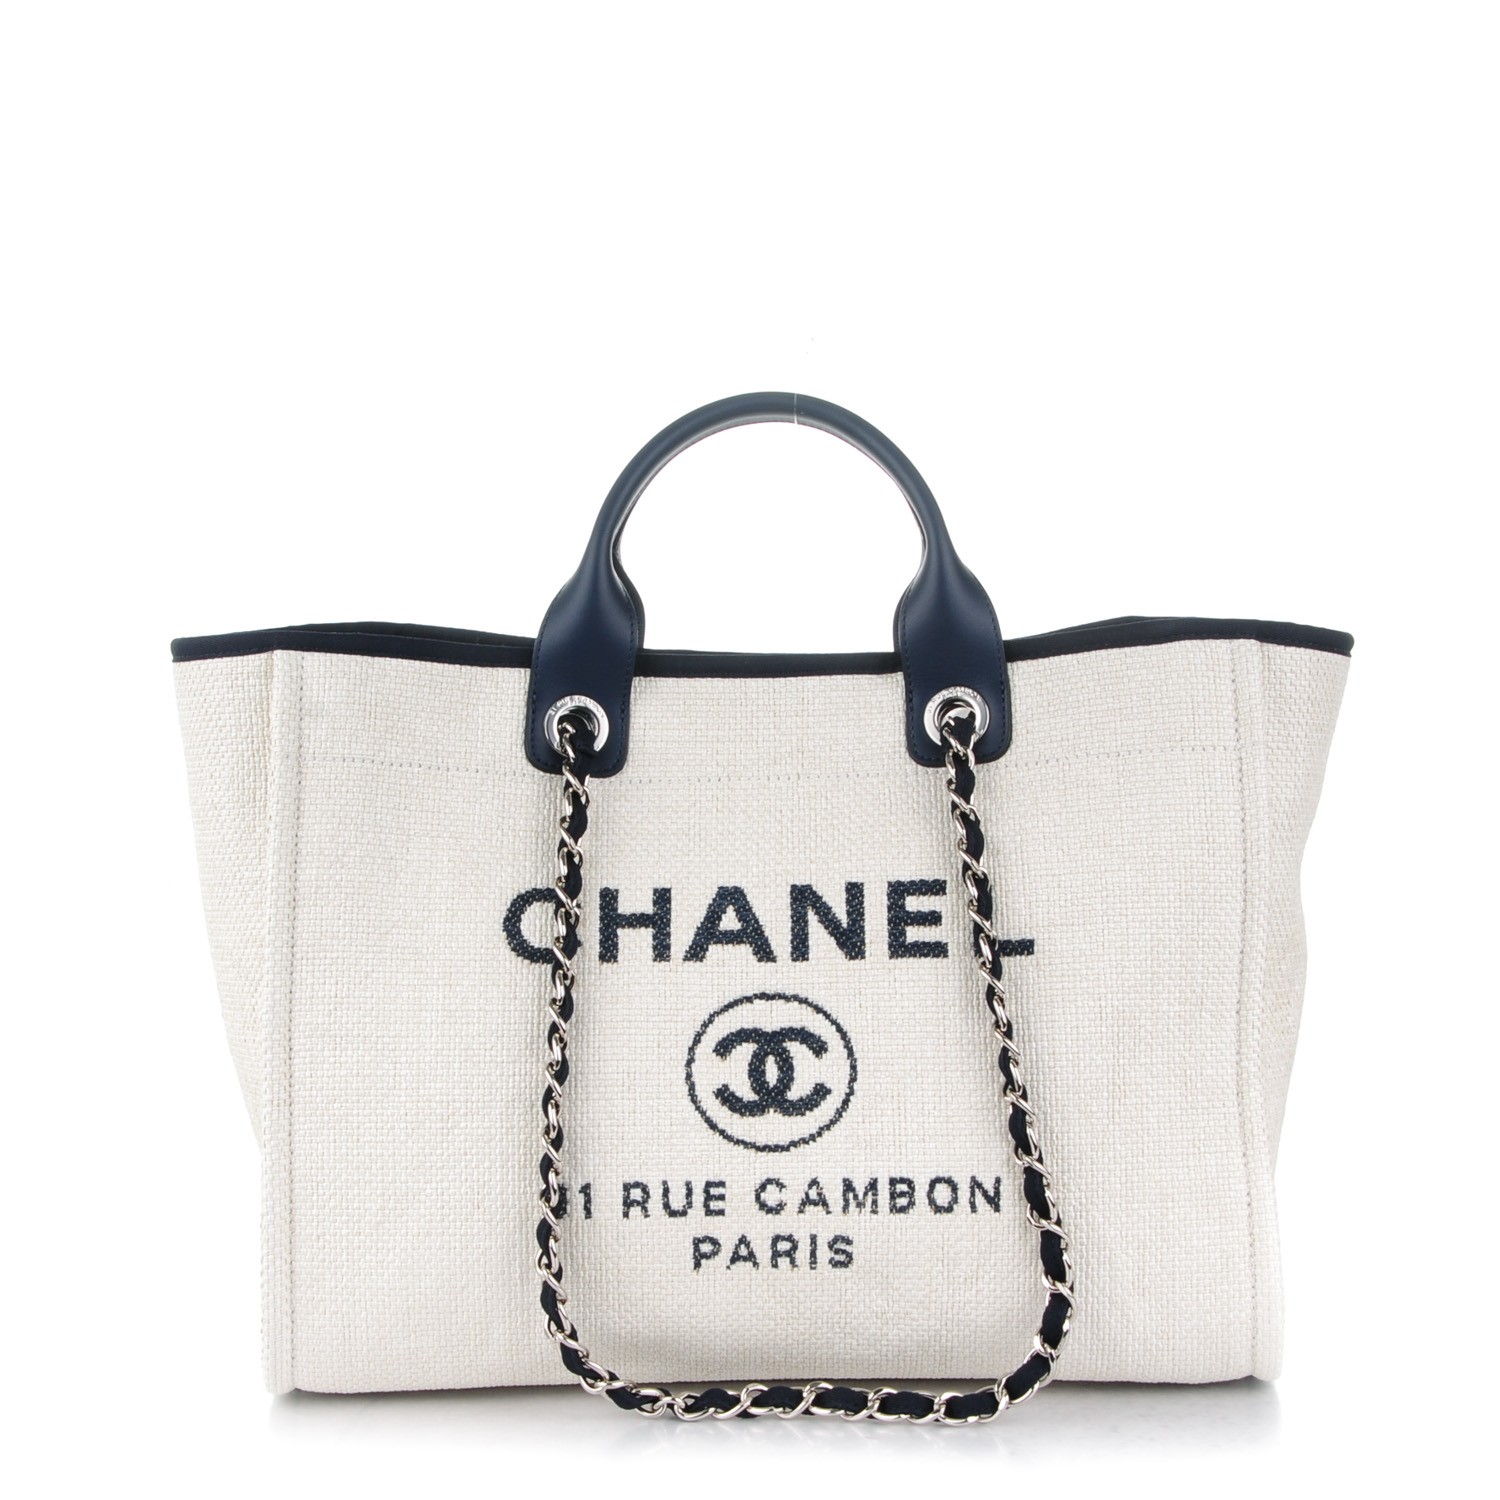 CHANEL Canvas Large Deauville Tote White Navy 168939